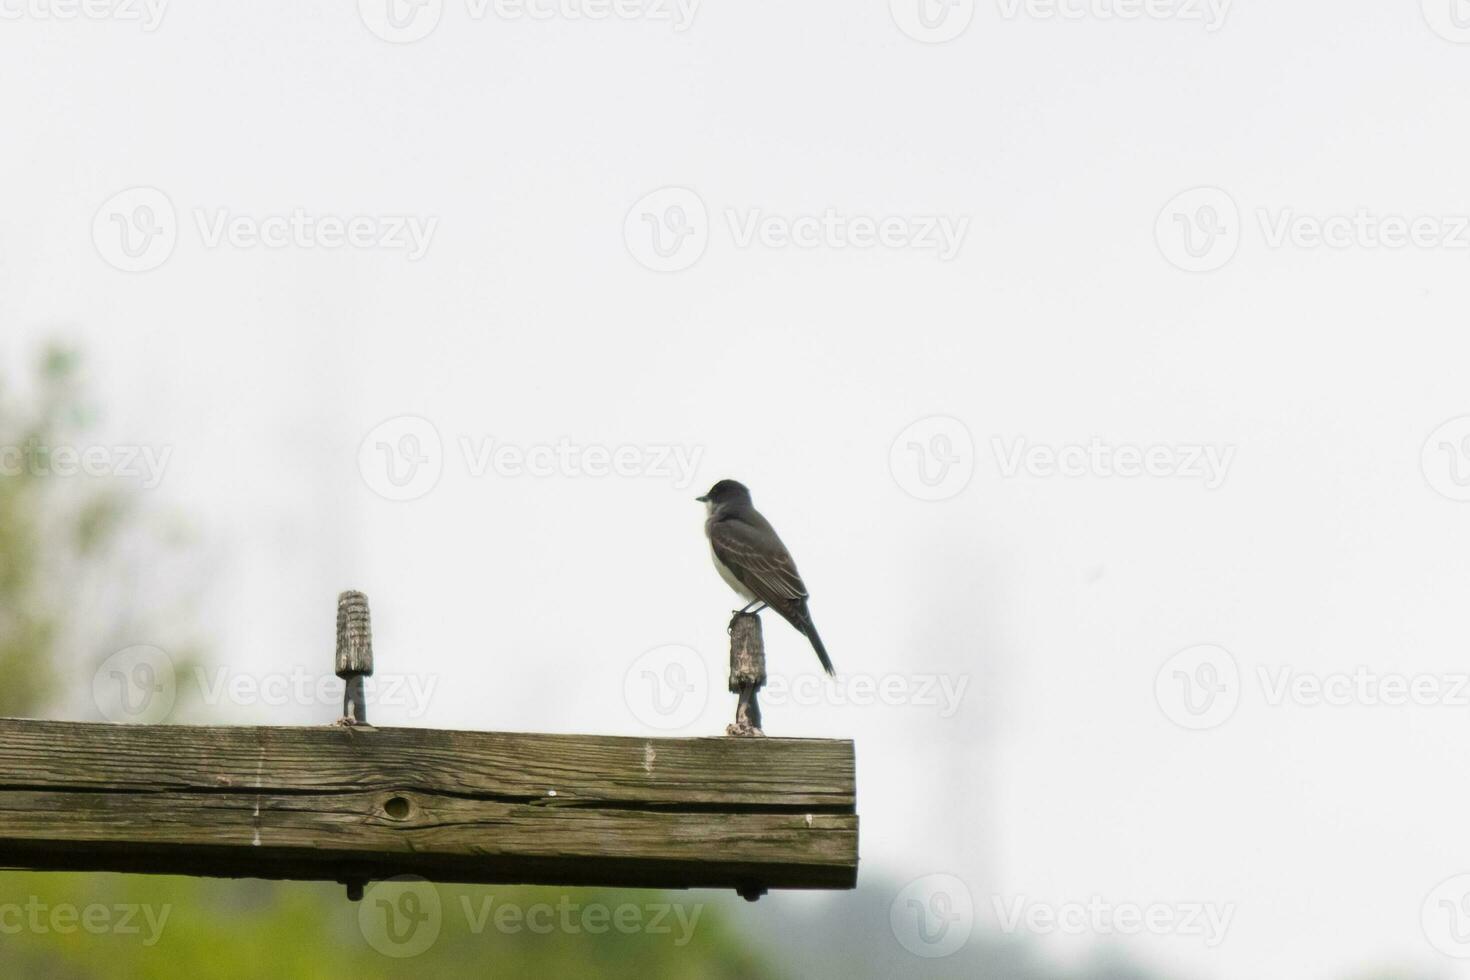 This eastern kingbird was perched on top of this post. They are a species of tyrant flycatchers. His grey feathers looking pretty against the shite belly. This seen against a white sky. photo